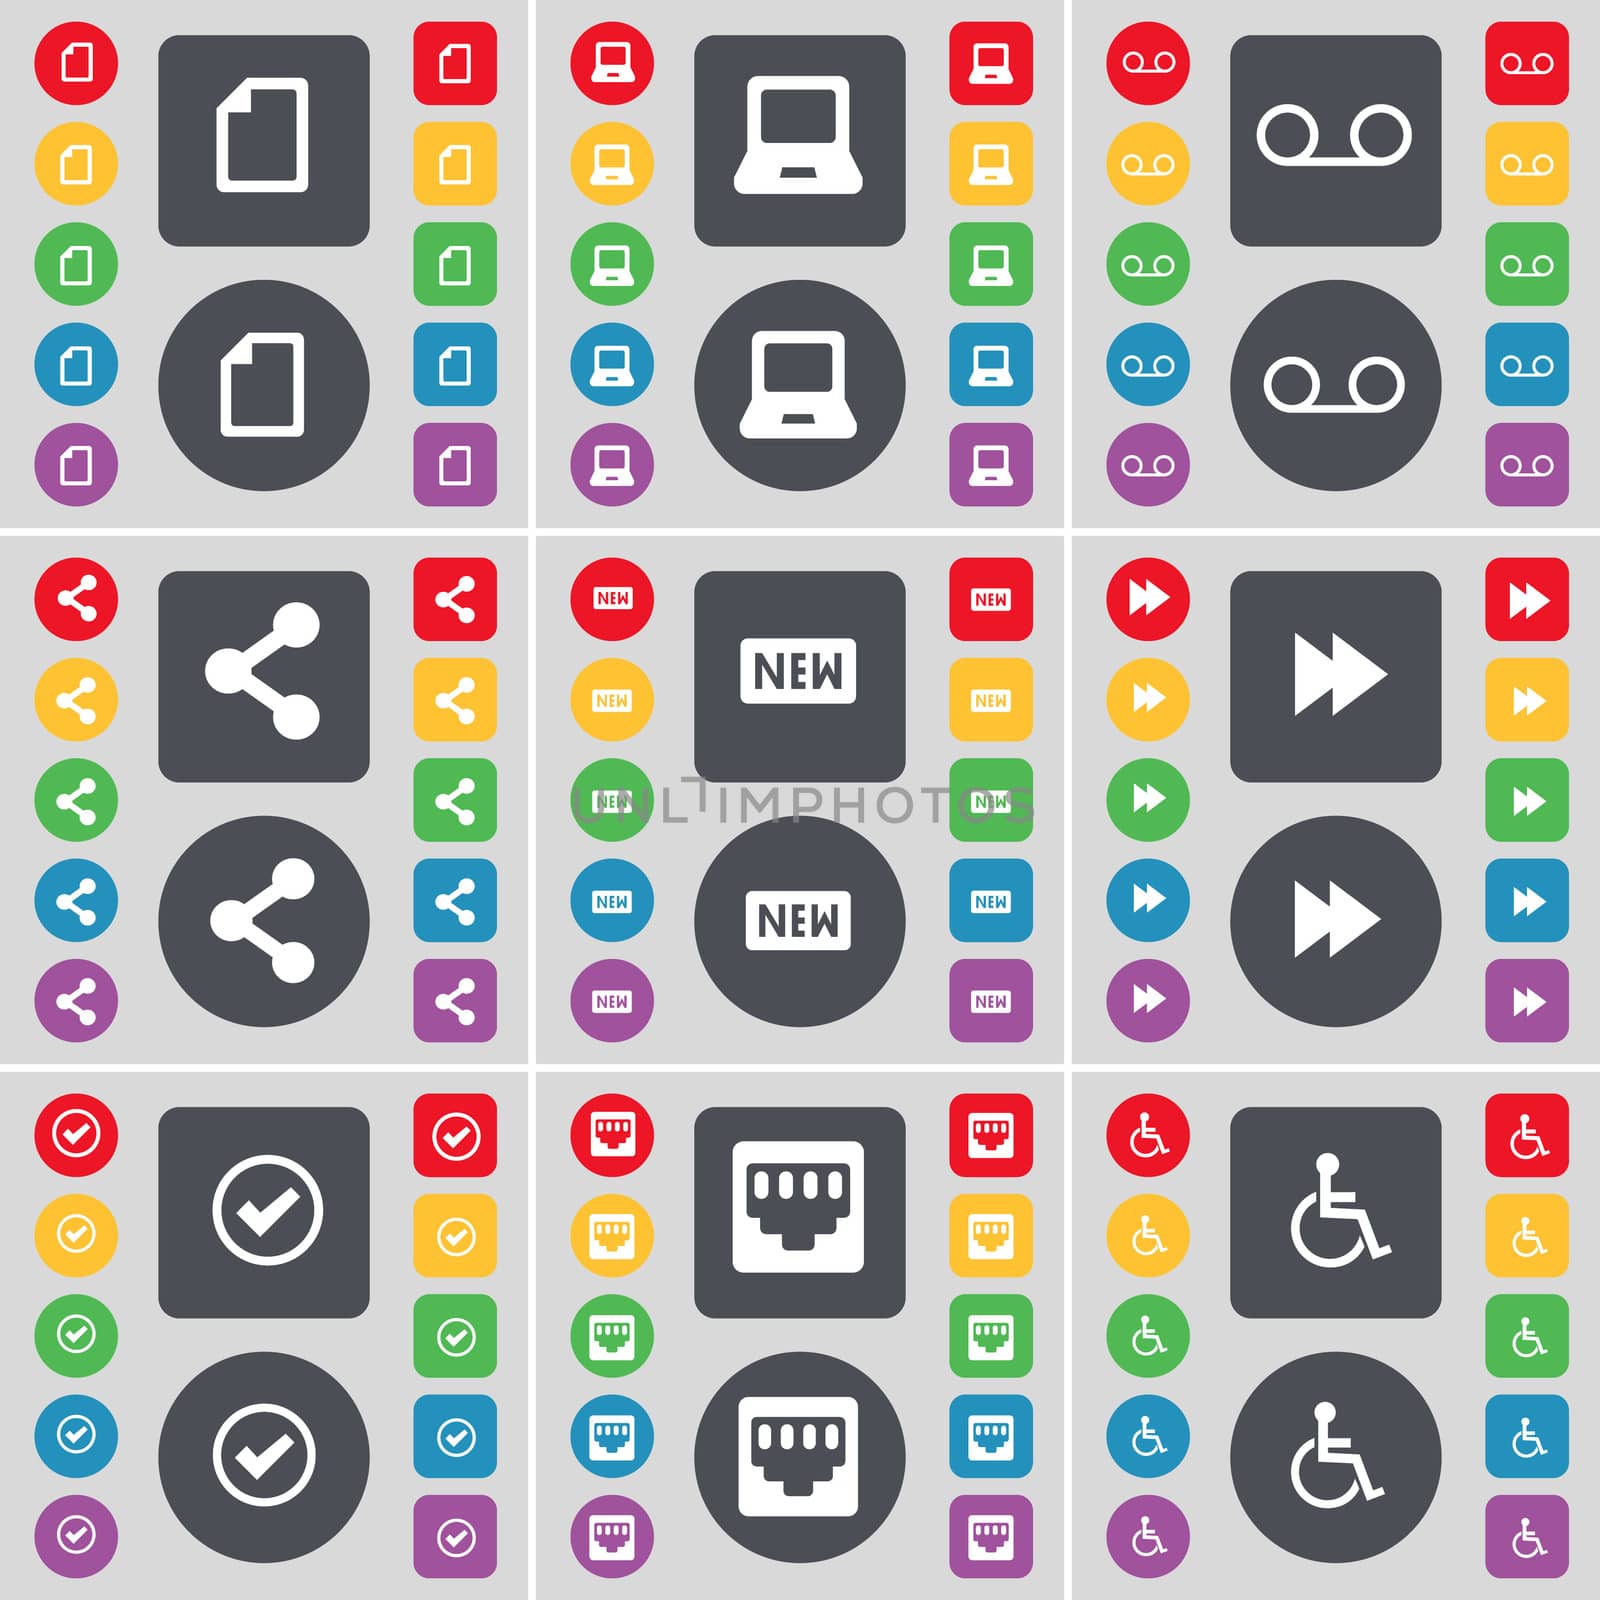 File, Laptop, Cassette, Share, New, Rewind, Tick, LAN socket, Disabled person icon symbol. A large set of flat, colored buttons for your design.  by serhii_lohvyniuk